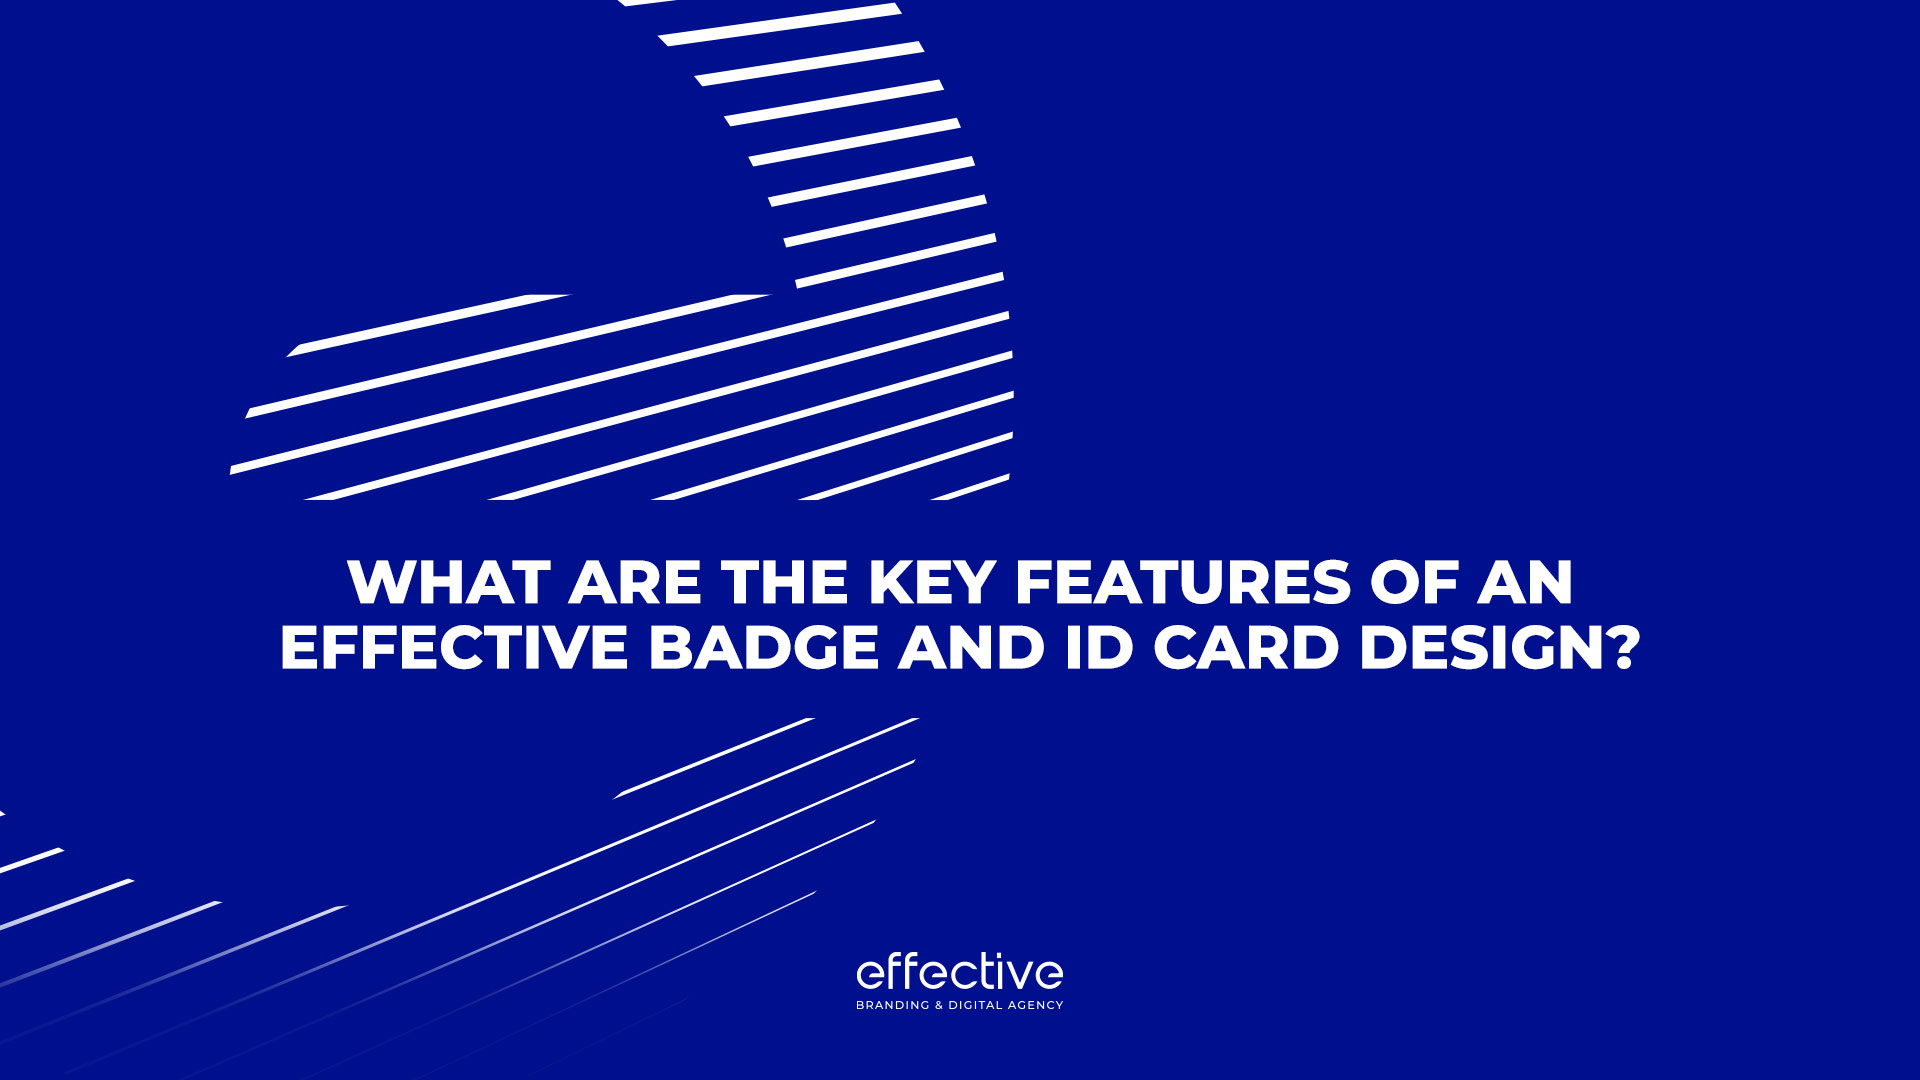 What Are the Key Features of an Effective Badge and ID Card Design?